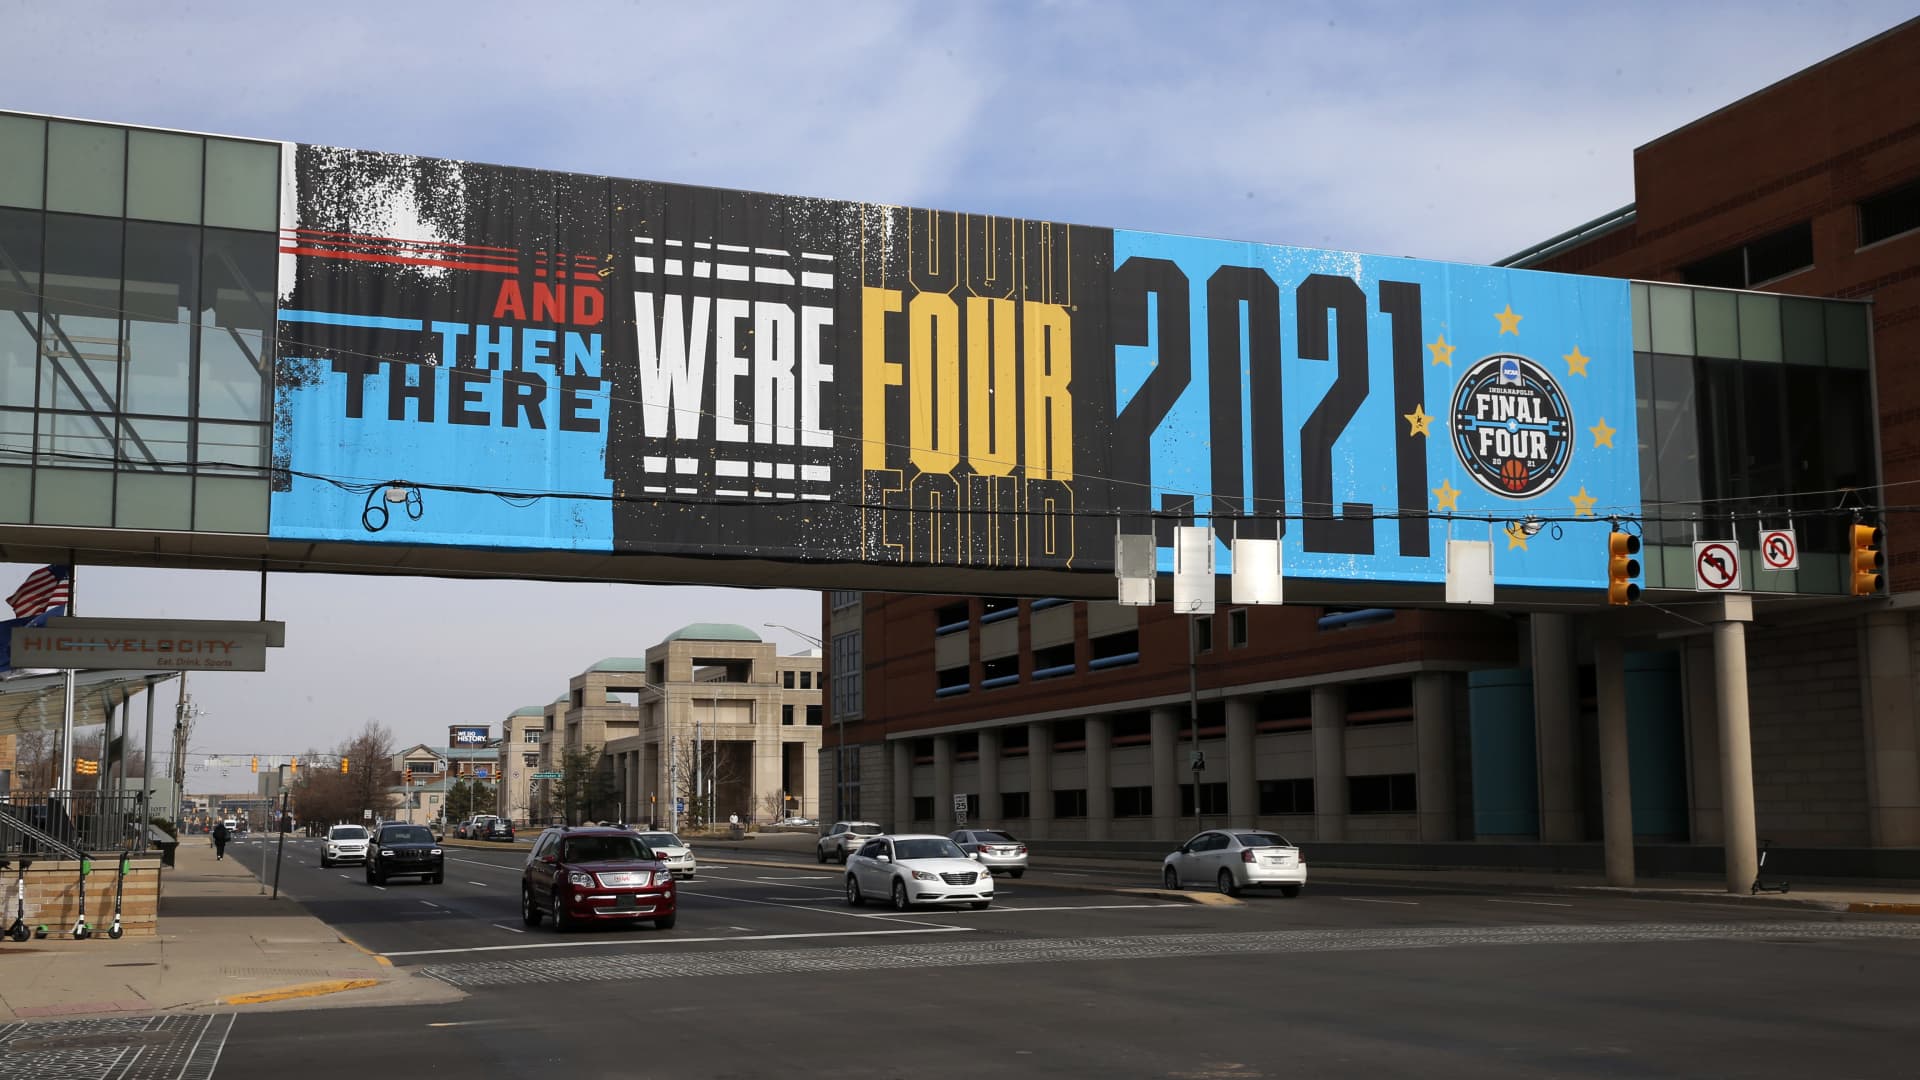 Signage on display to commemorate March Madness and the 2021 NCAA Men's Final Four as seen on March 9, 2021 in Indianapolis, IN.